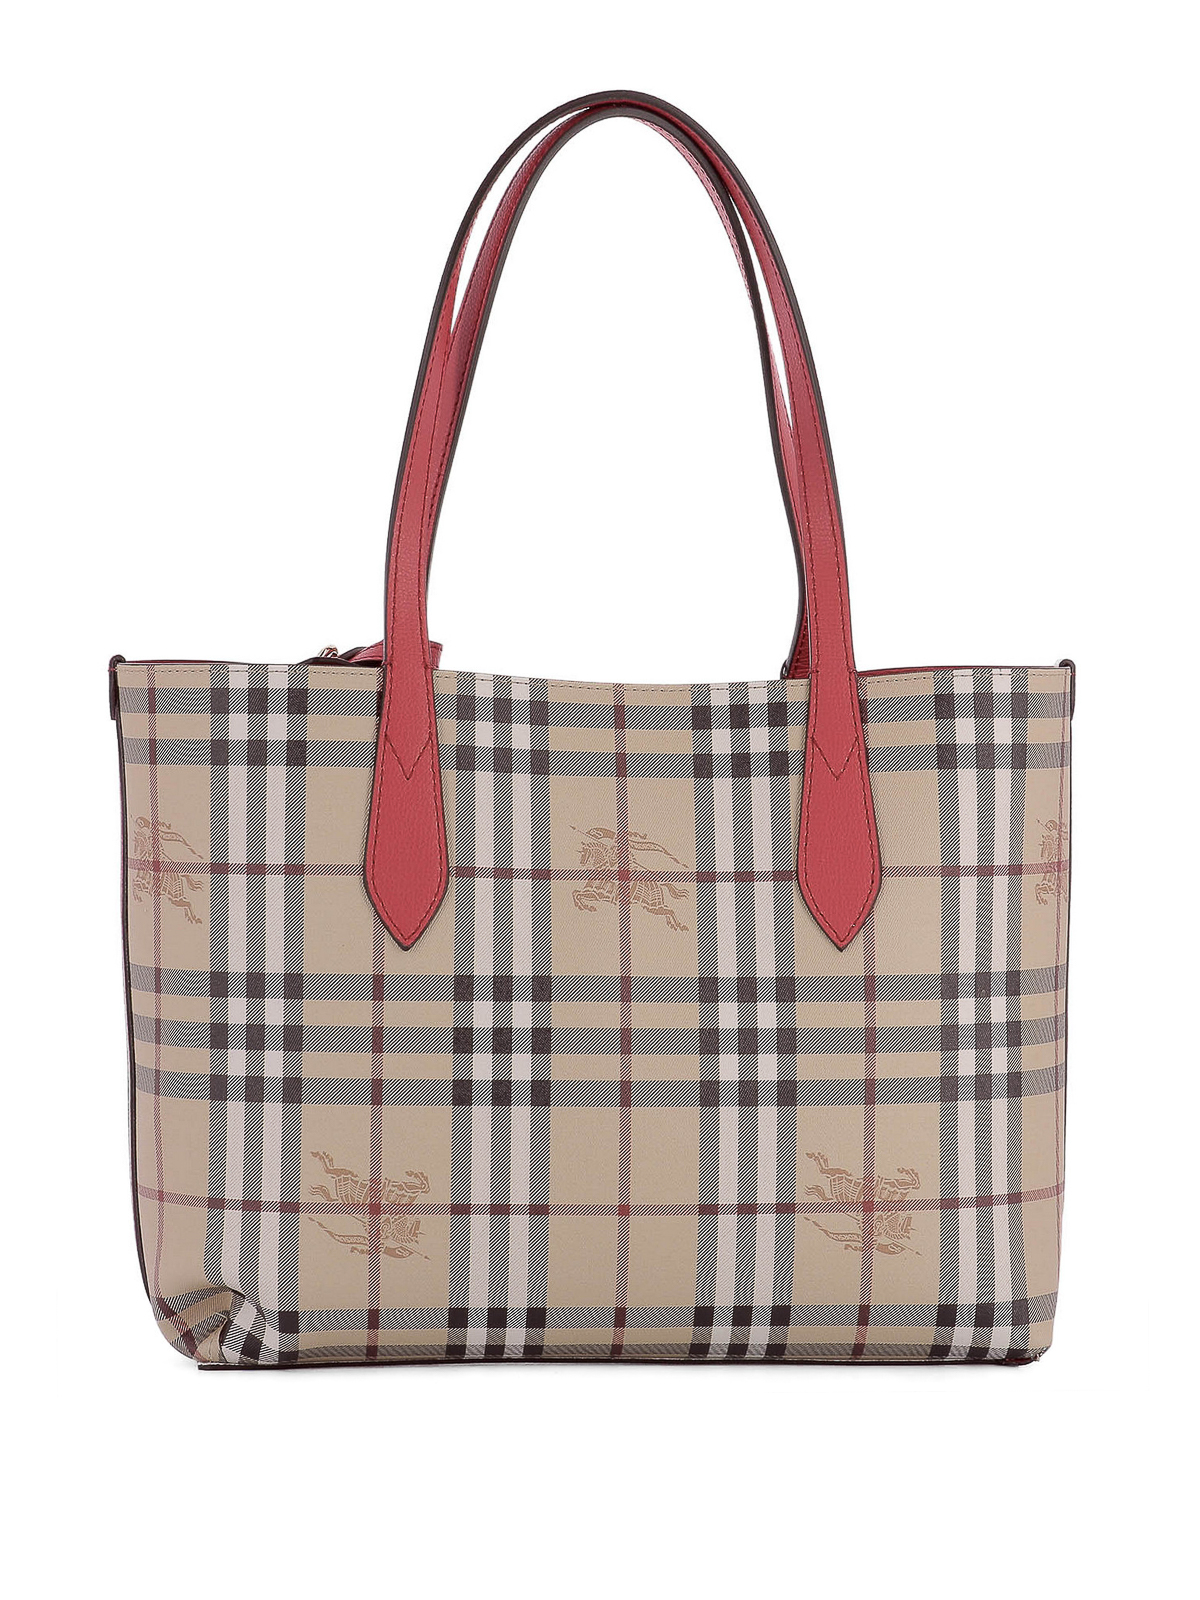 Totes bags Burberry - Leather small reversible tote - 4049620 